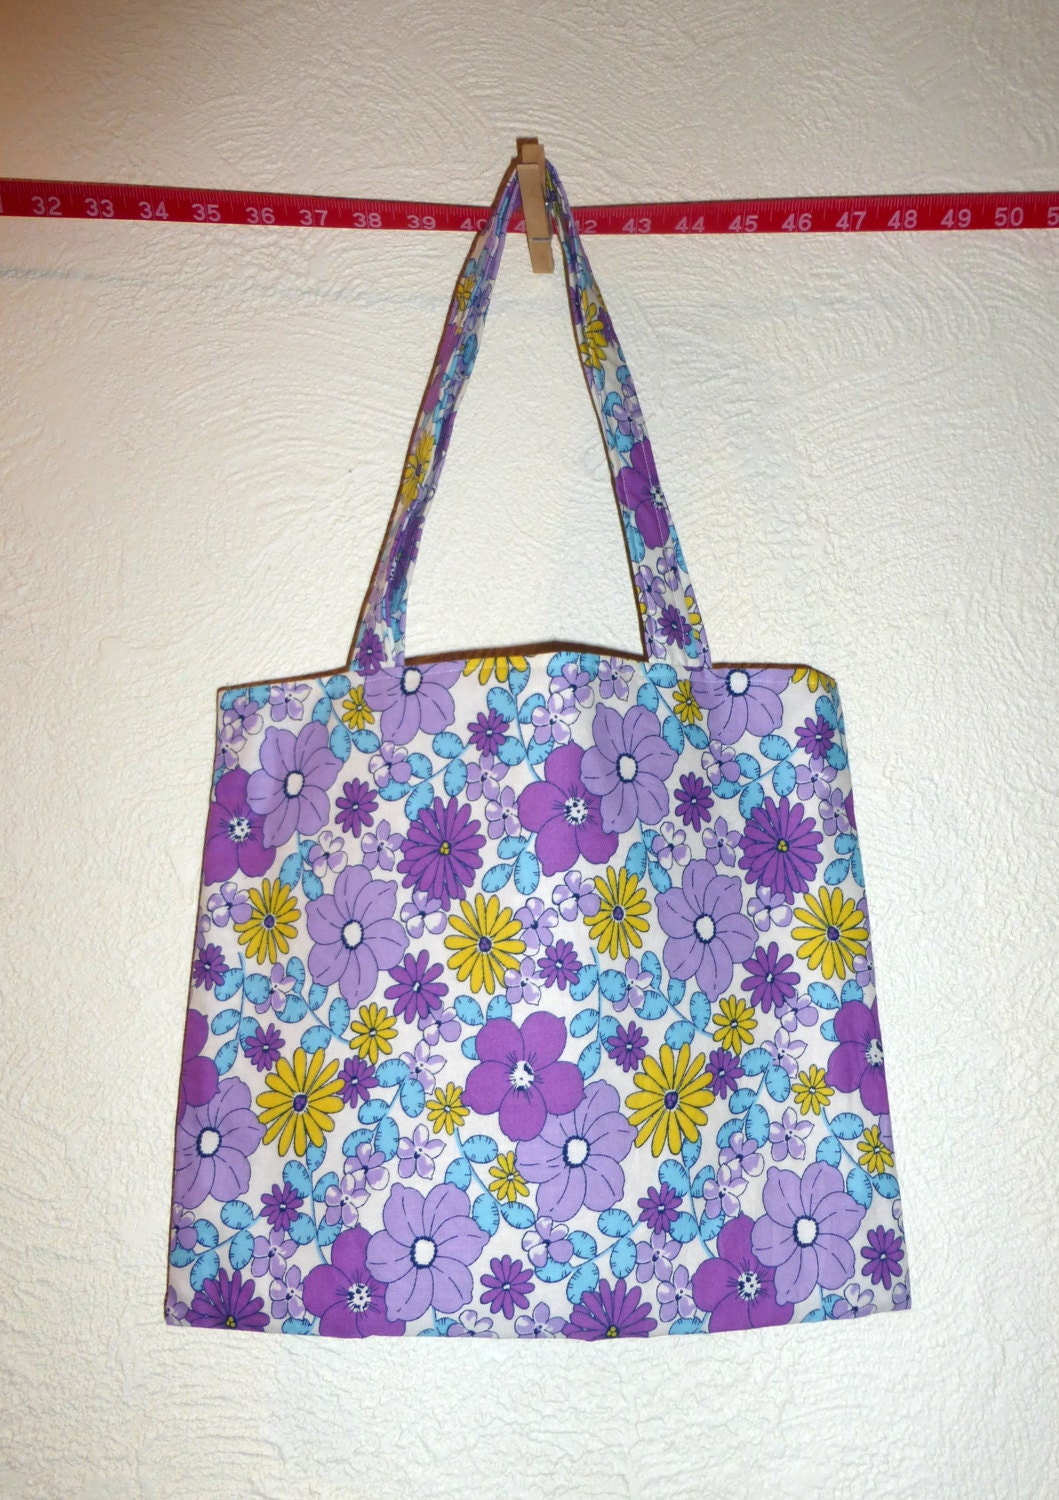 RETRO Floral PURPLE Fabric TOTE Bag Purse Fully Lined